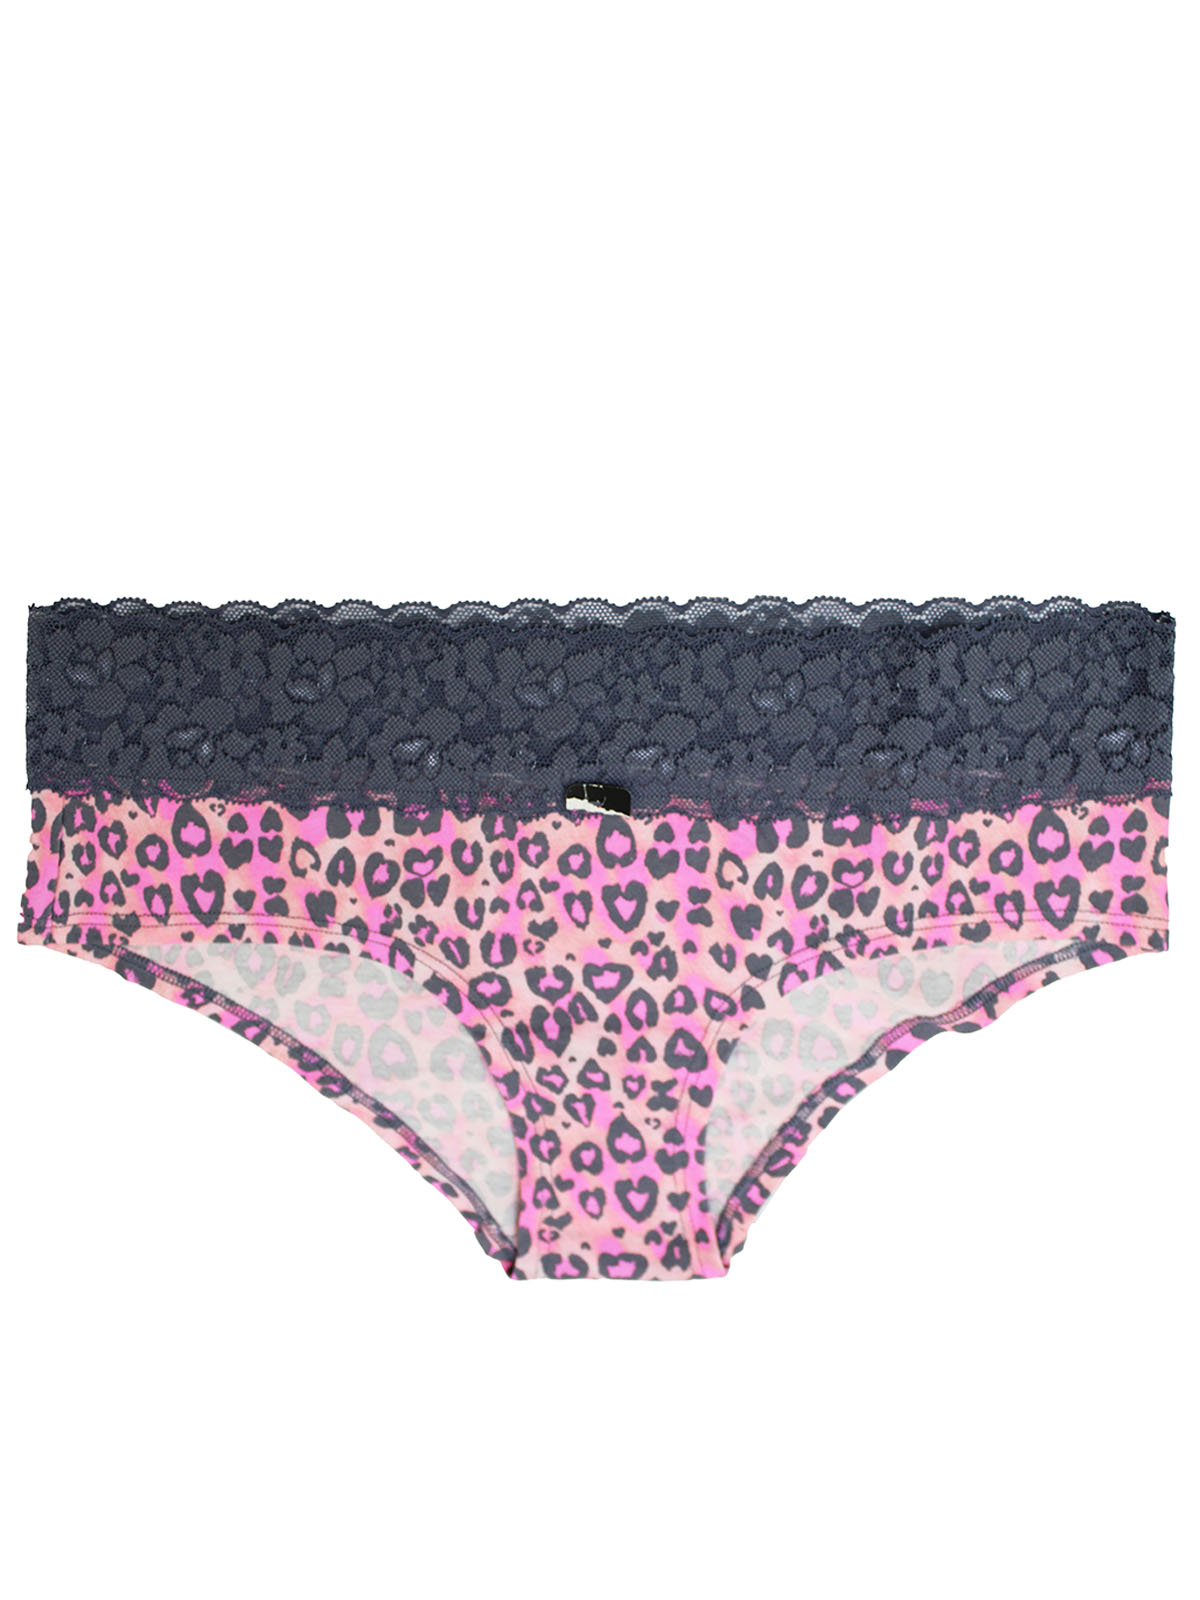 Buy Ann Summers Sexy Lace Planet Brazilian Knickers from Next Ireland